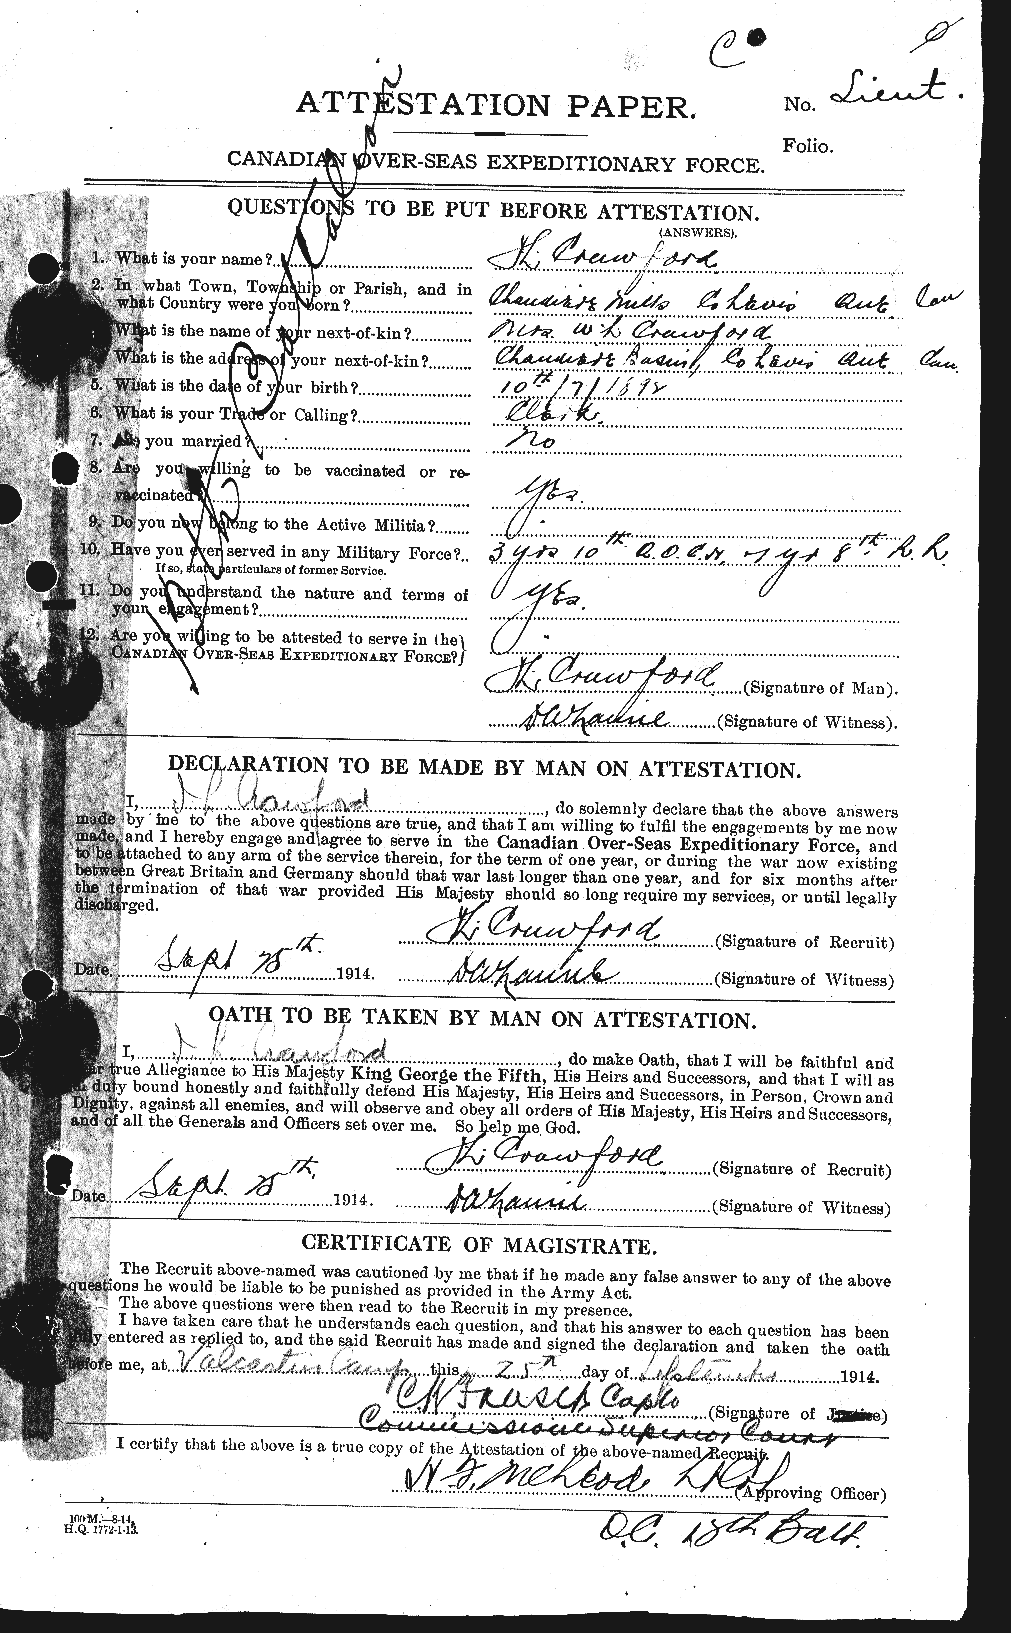 Personnel Records of the First World War - CEF 061366a